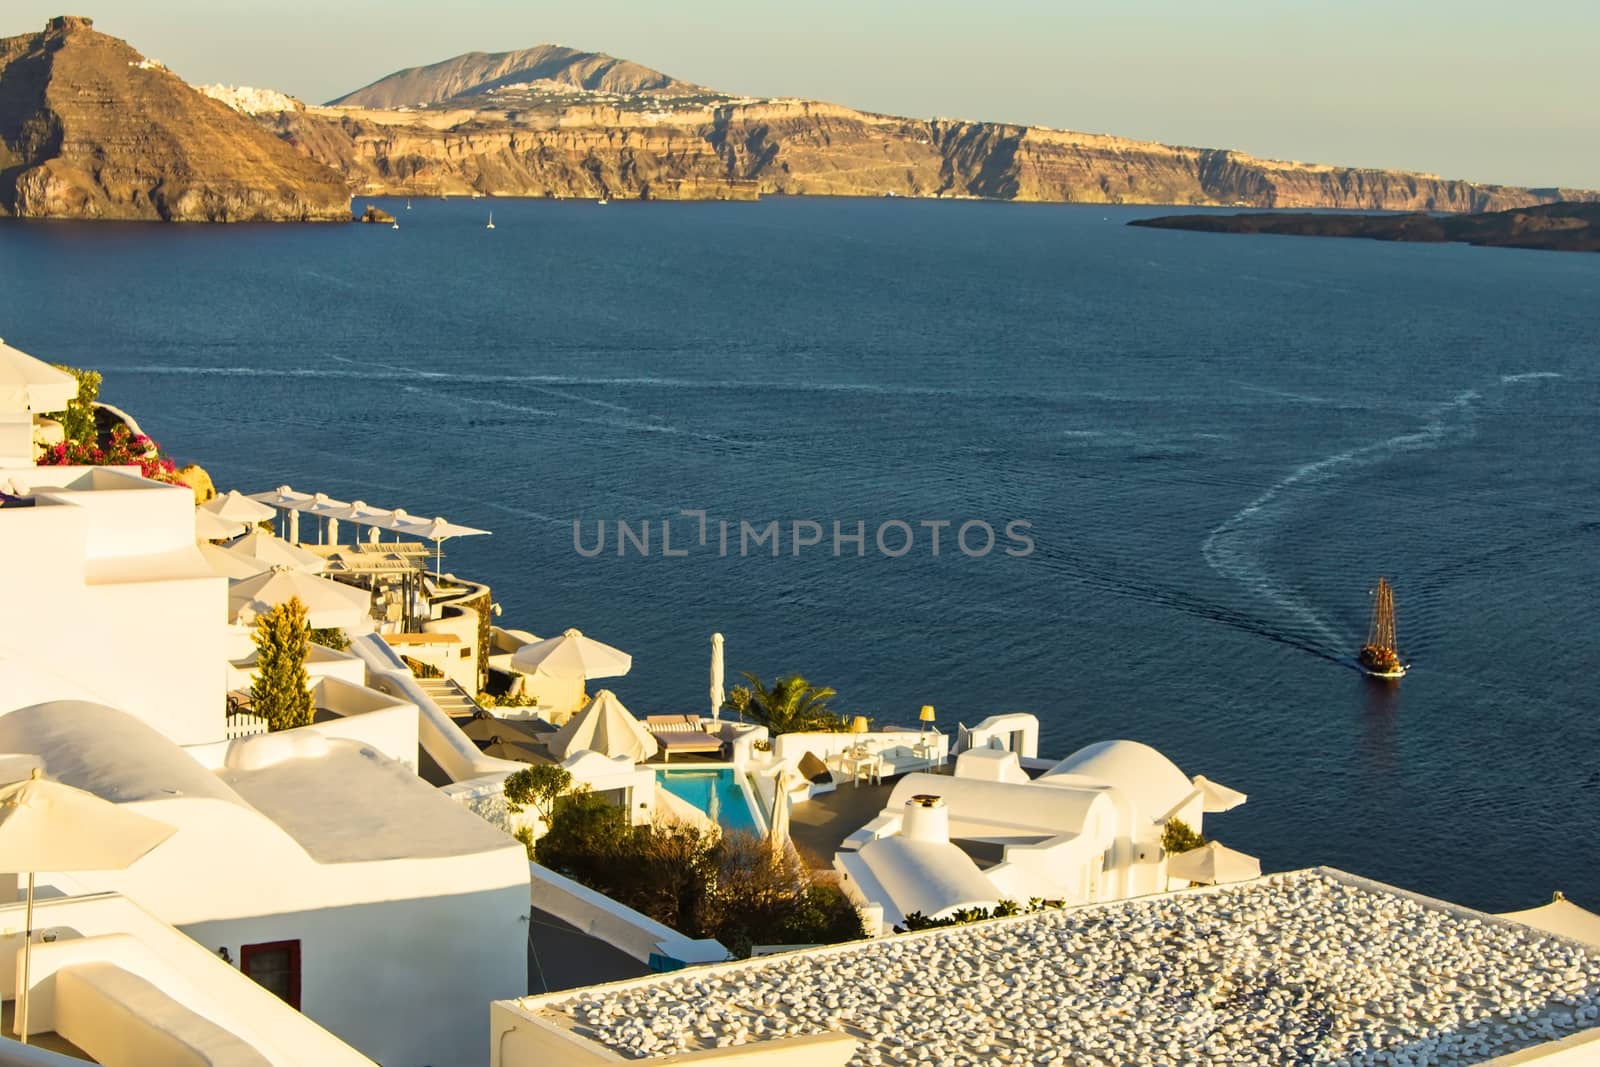 A tranquil panorama under the setting sun in the beautiful greek island